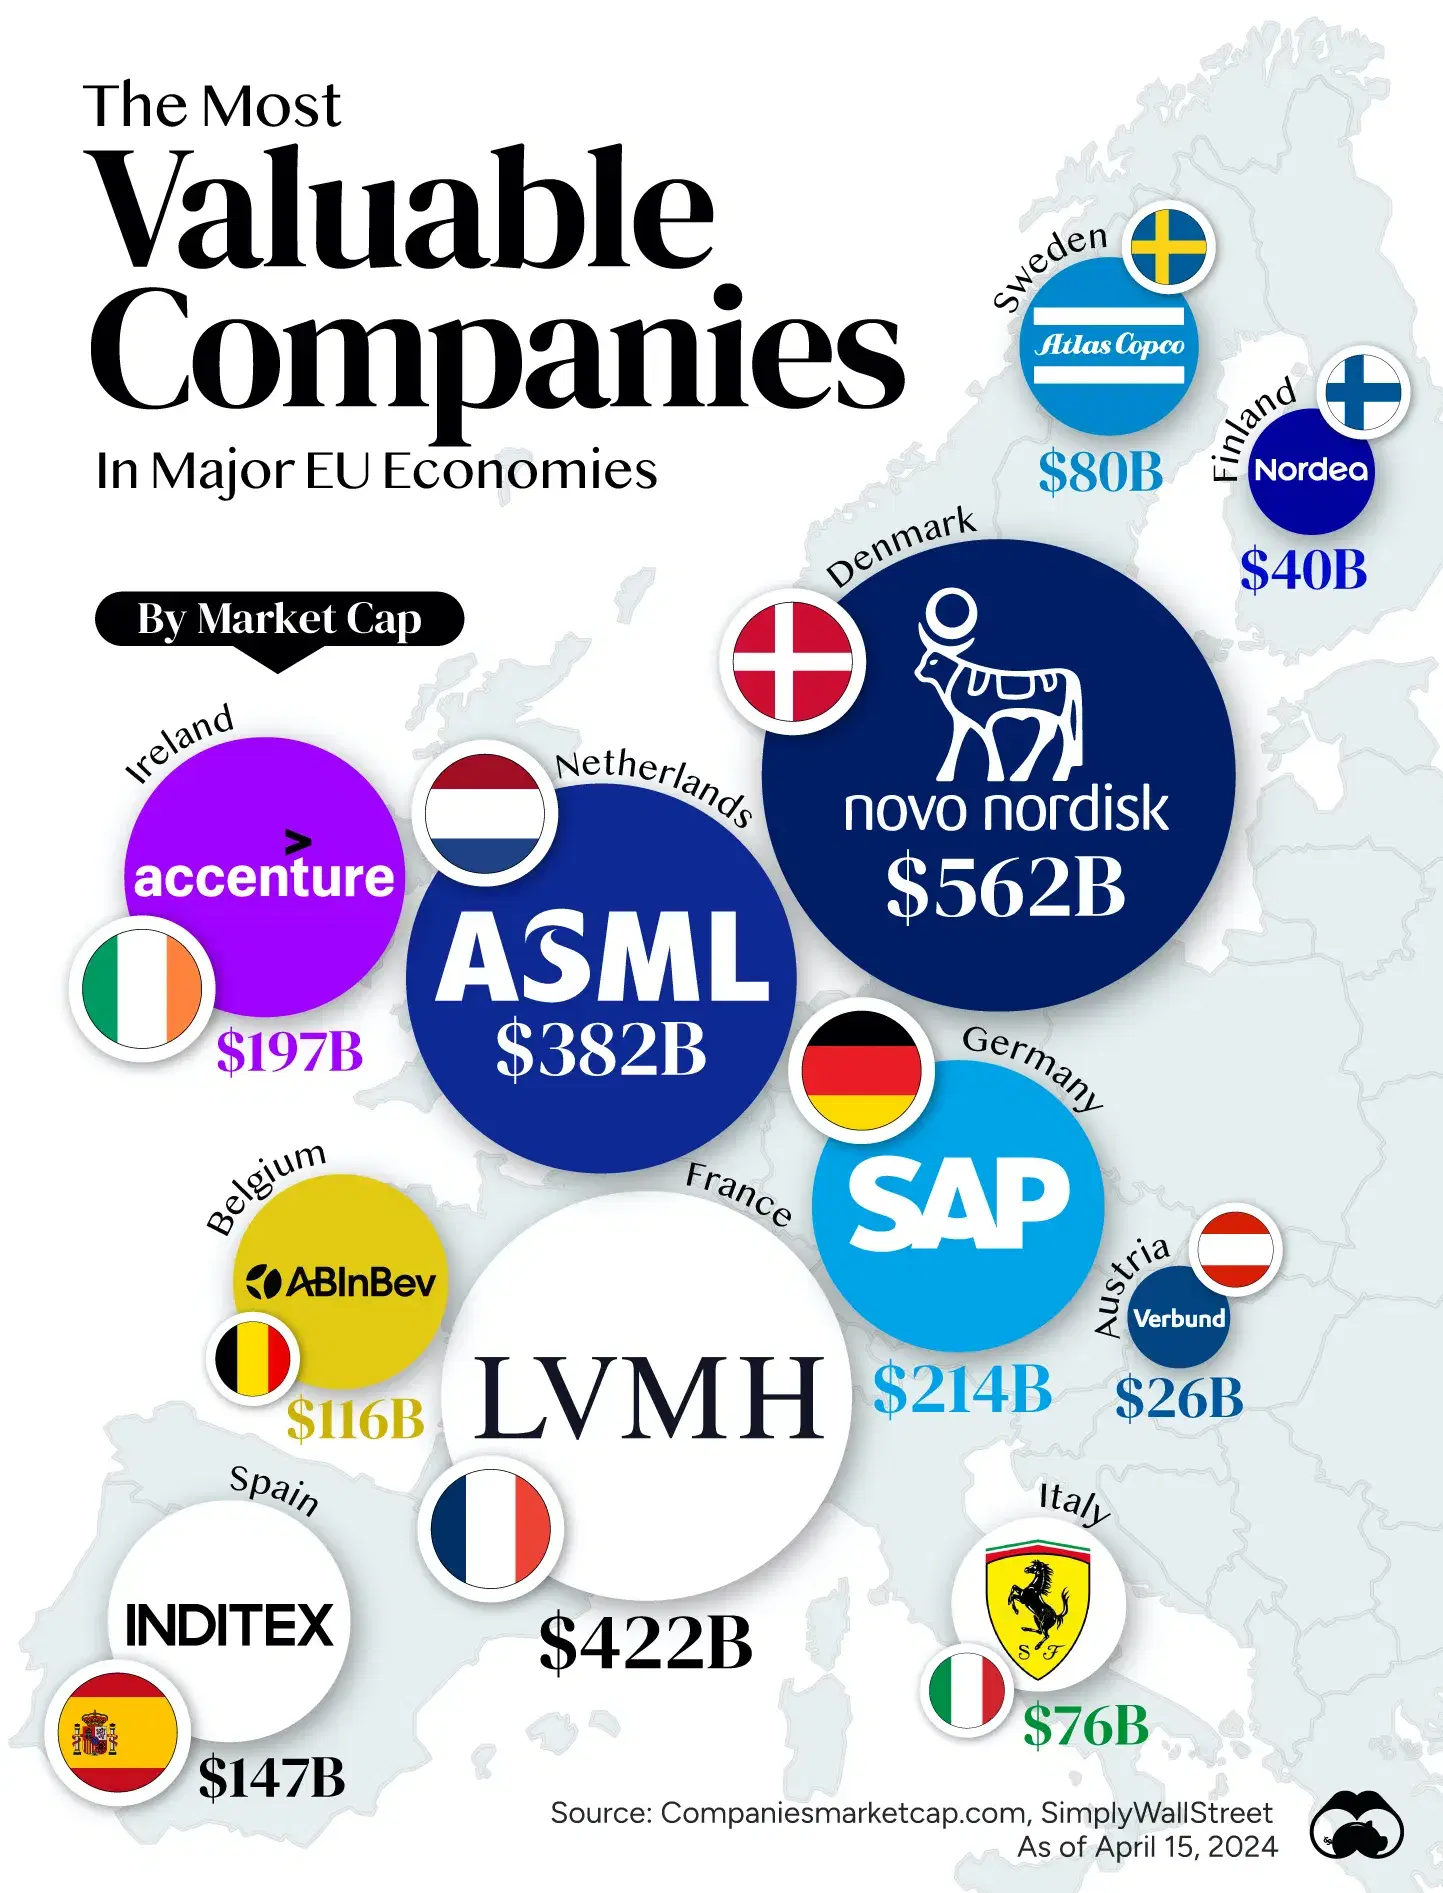 Novo Nordisk is the EU’s Most Valuable Company